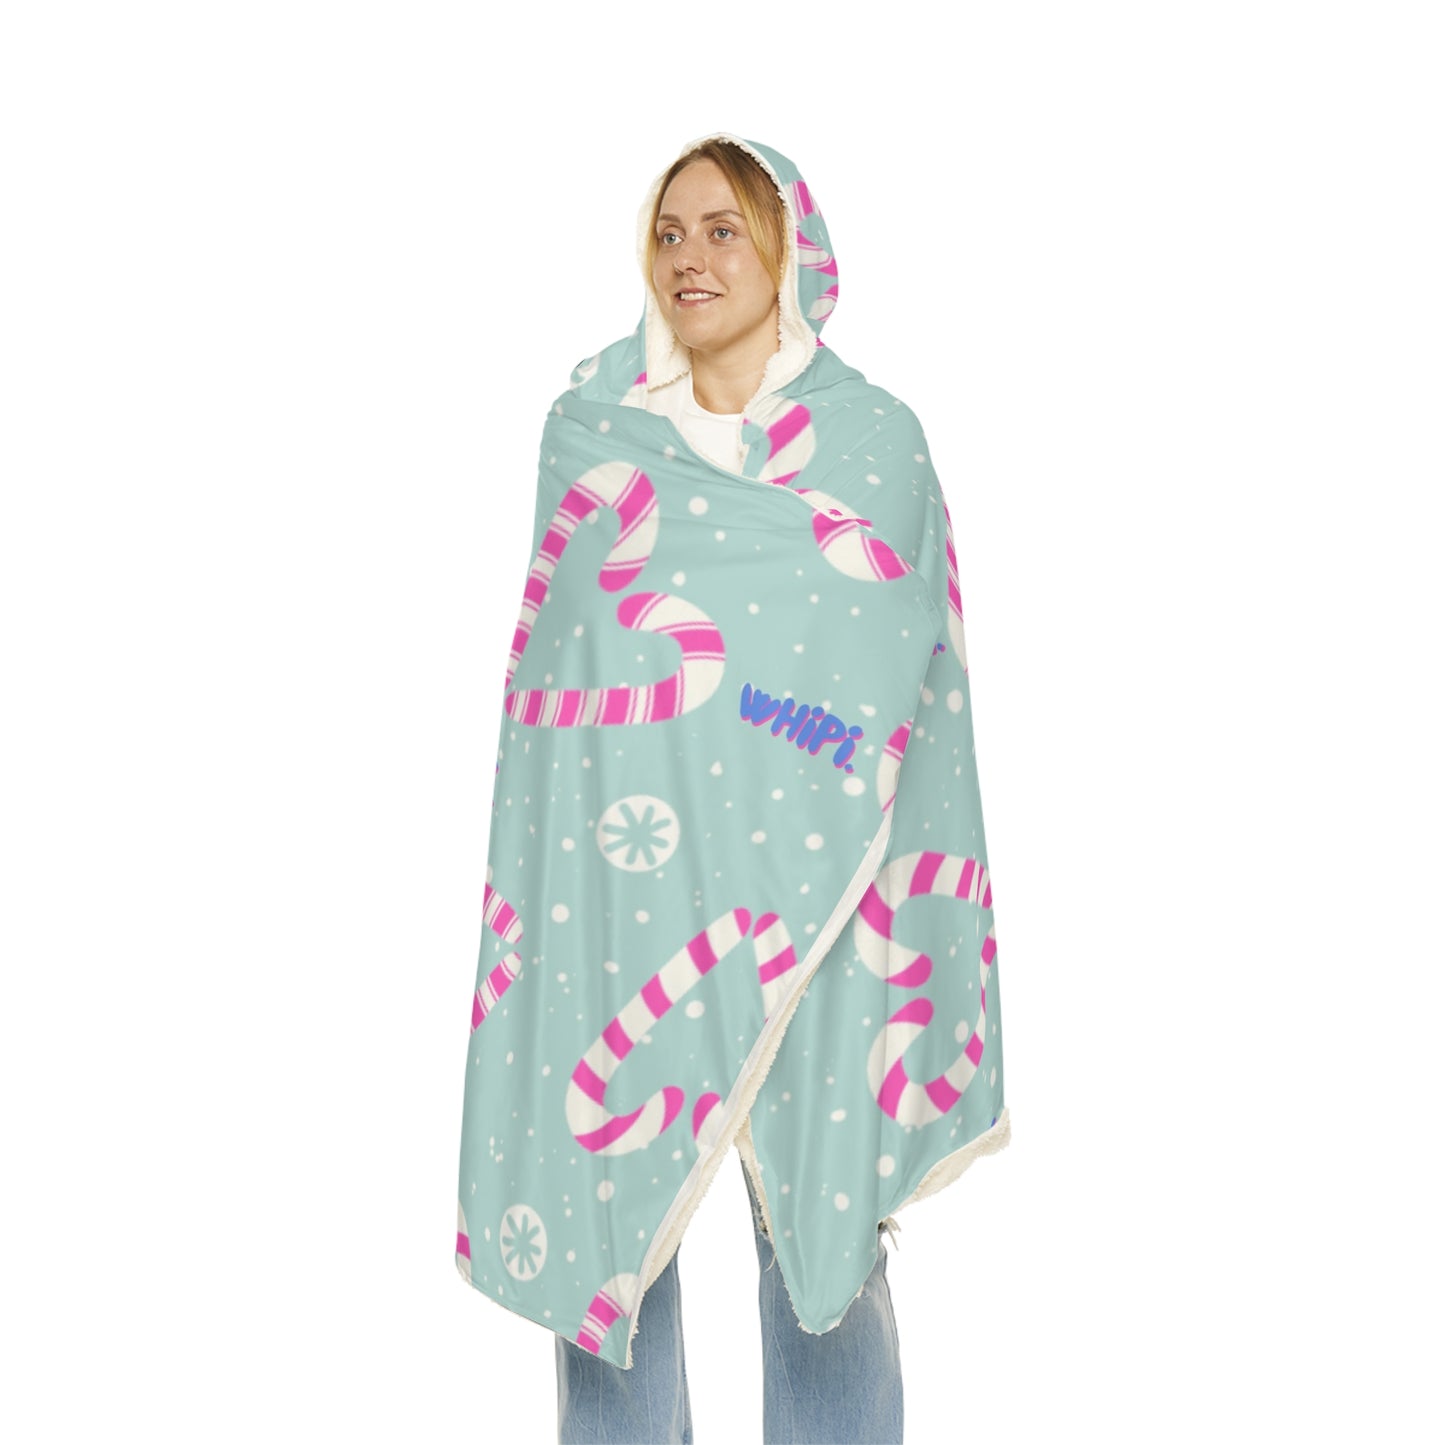 Hooked on You Snuggle Blanket